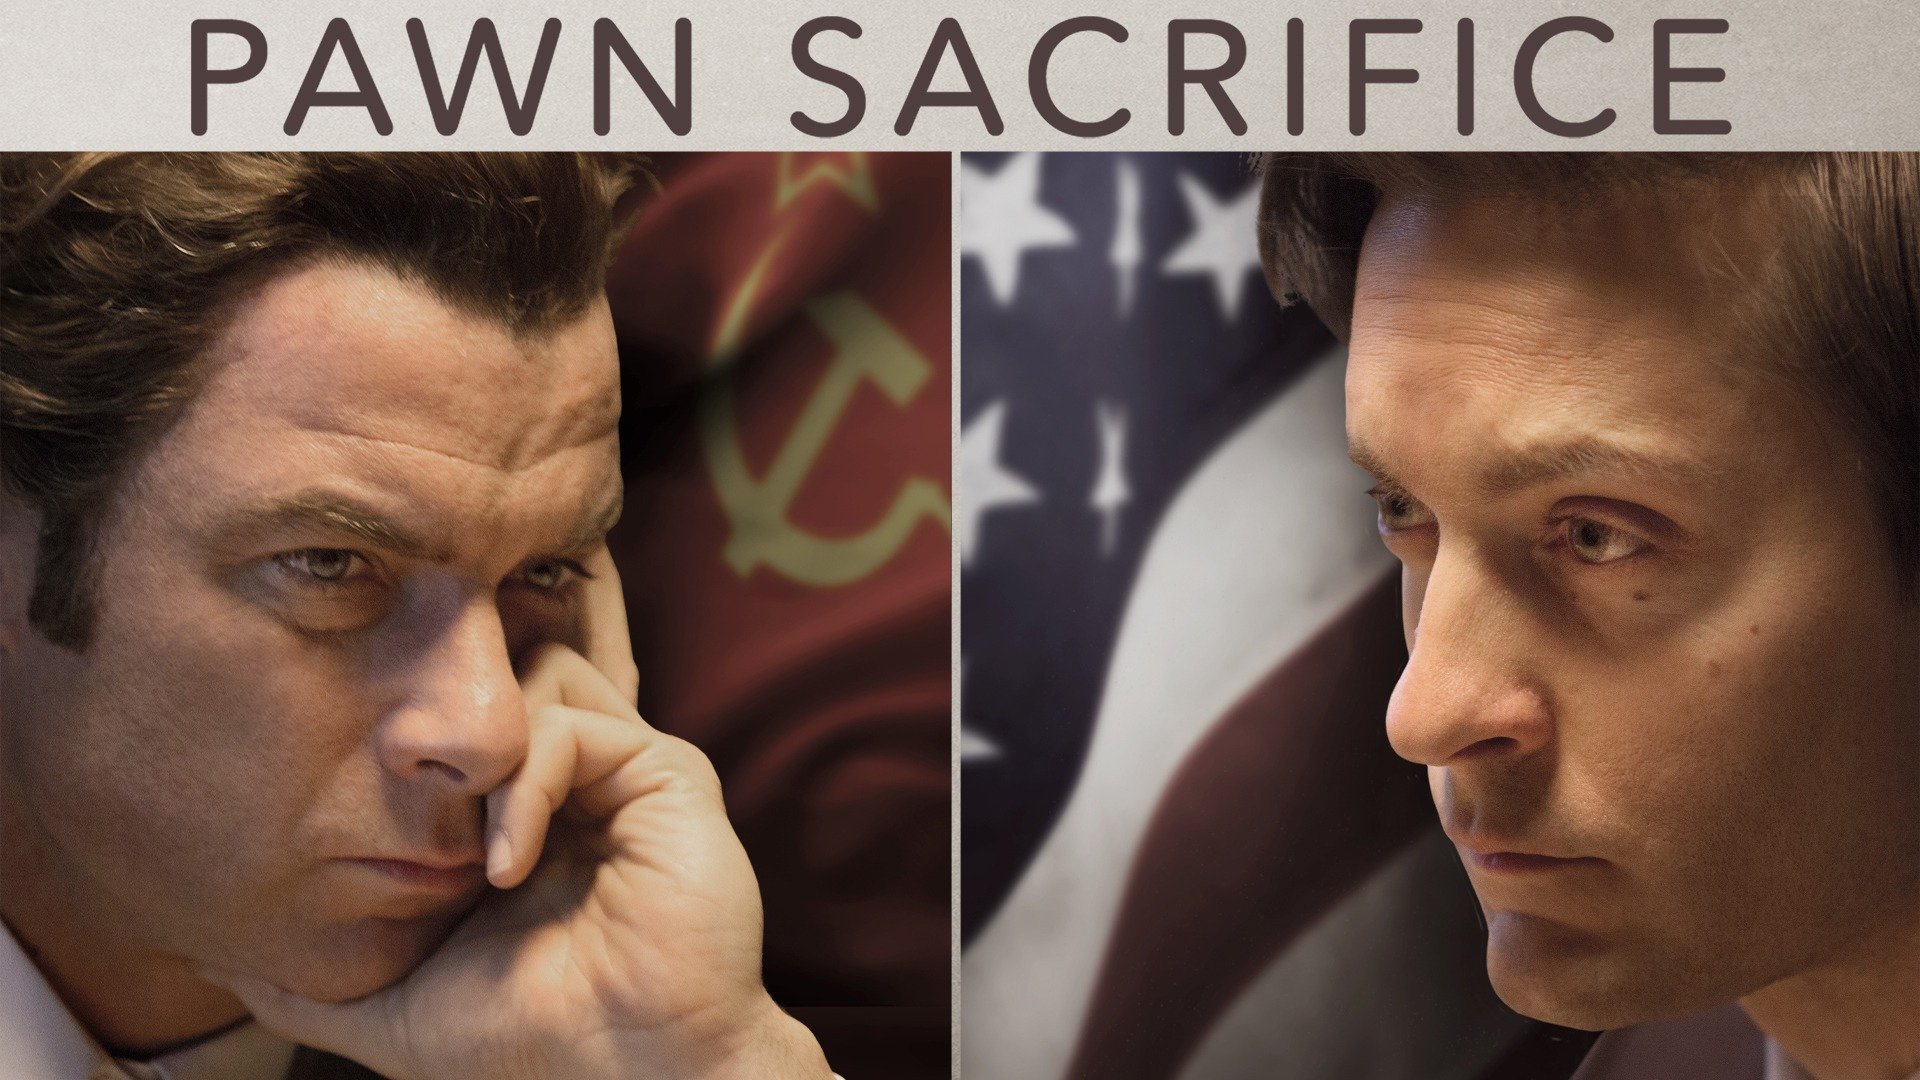 Watch Pawn Sacrifice (2014) Online, Free Trial, The Roku Channel